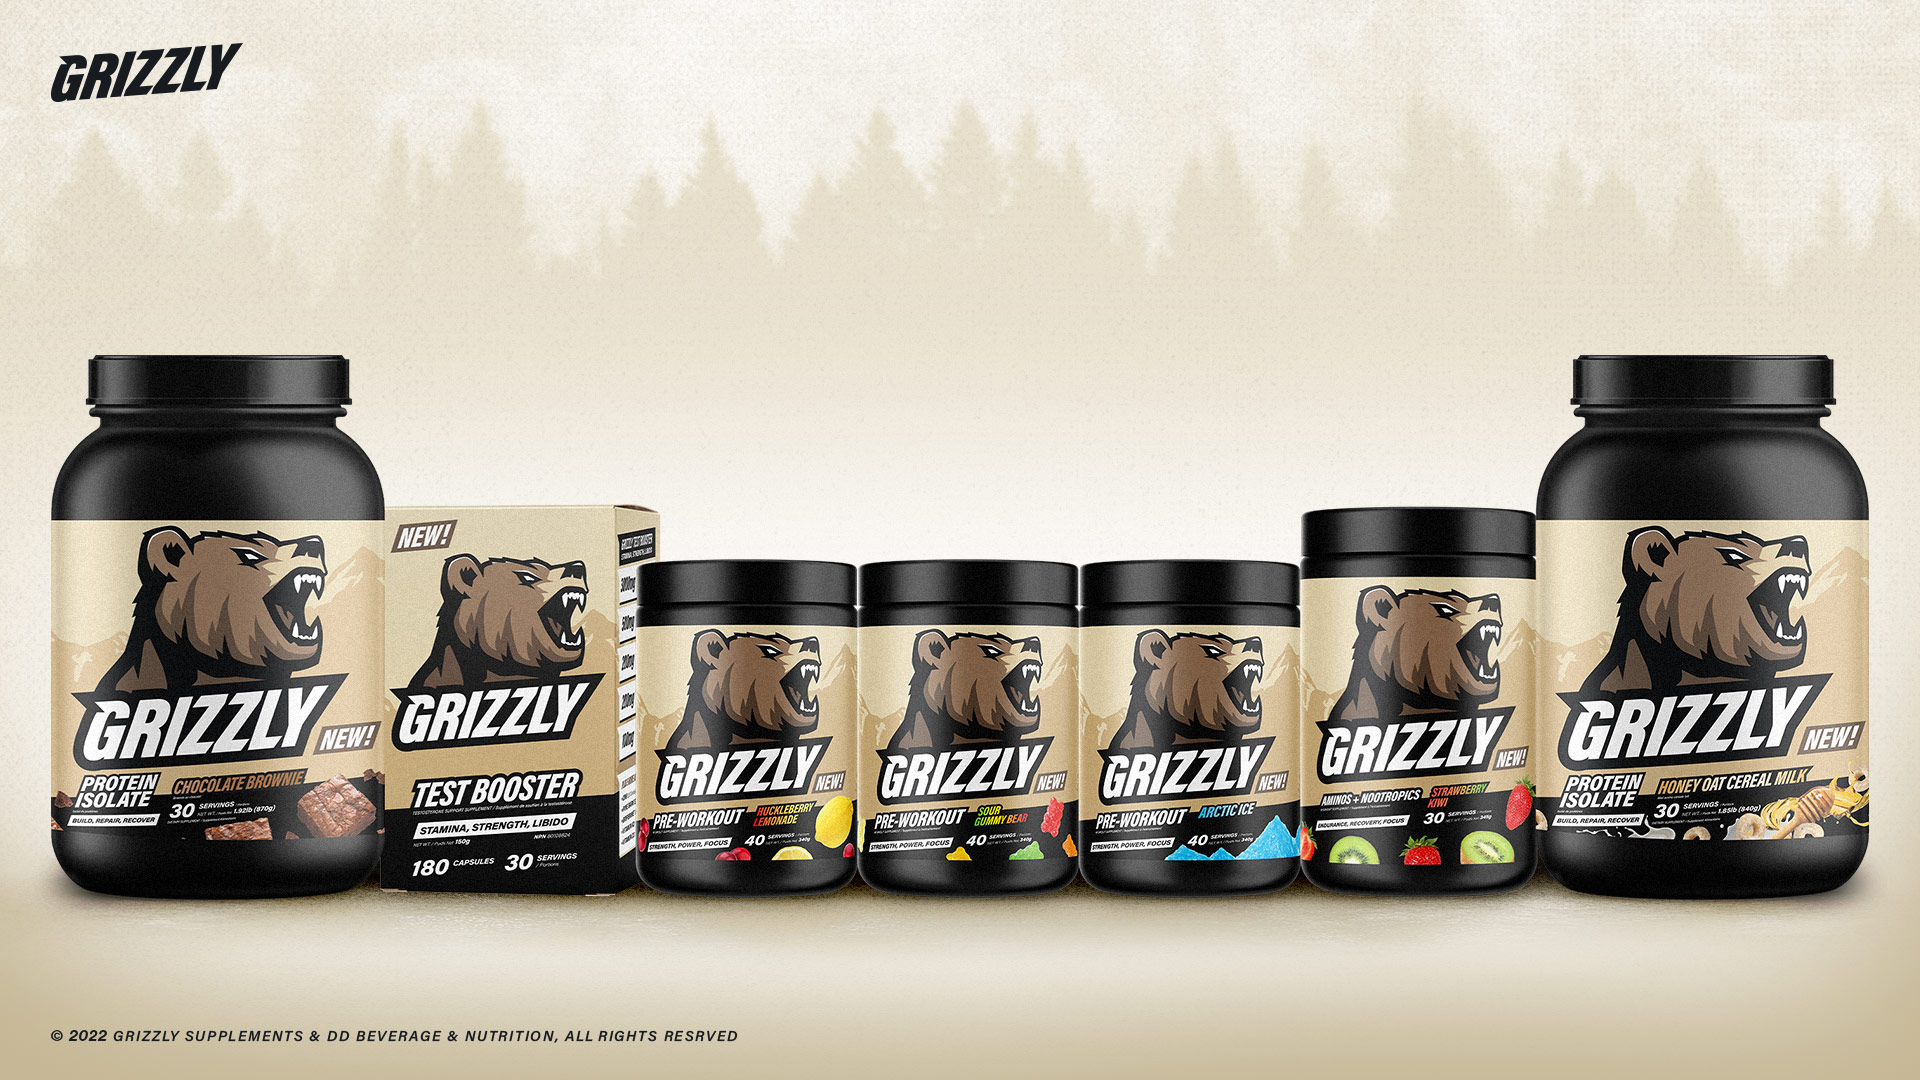 Grizzly_Products_012a